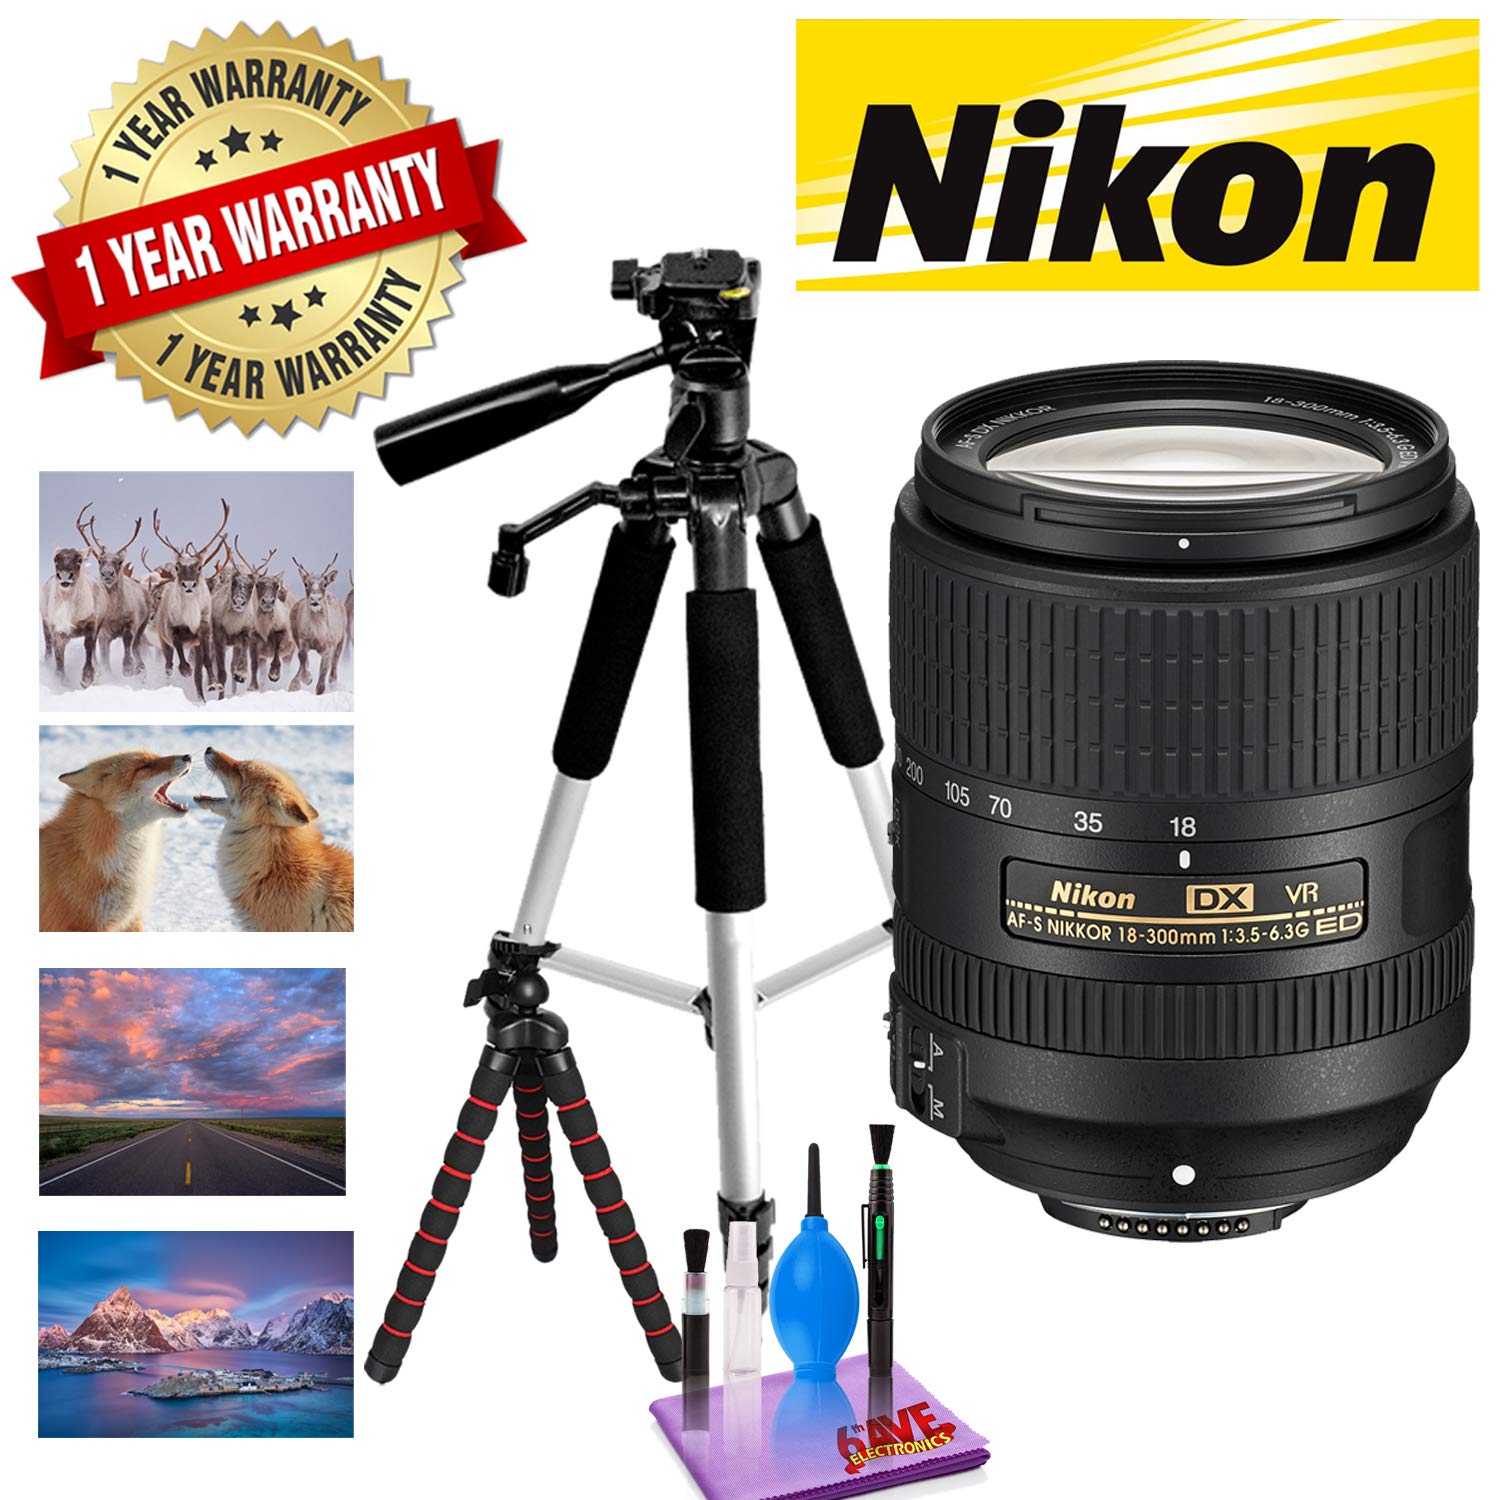 NIKON 18-300MM F/3.5-6.3G ED AF-S DX VR Lens with 1 Year Warranty, 12 in Flexible Tripod and 72 in Professional Bundle